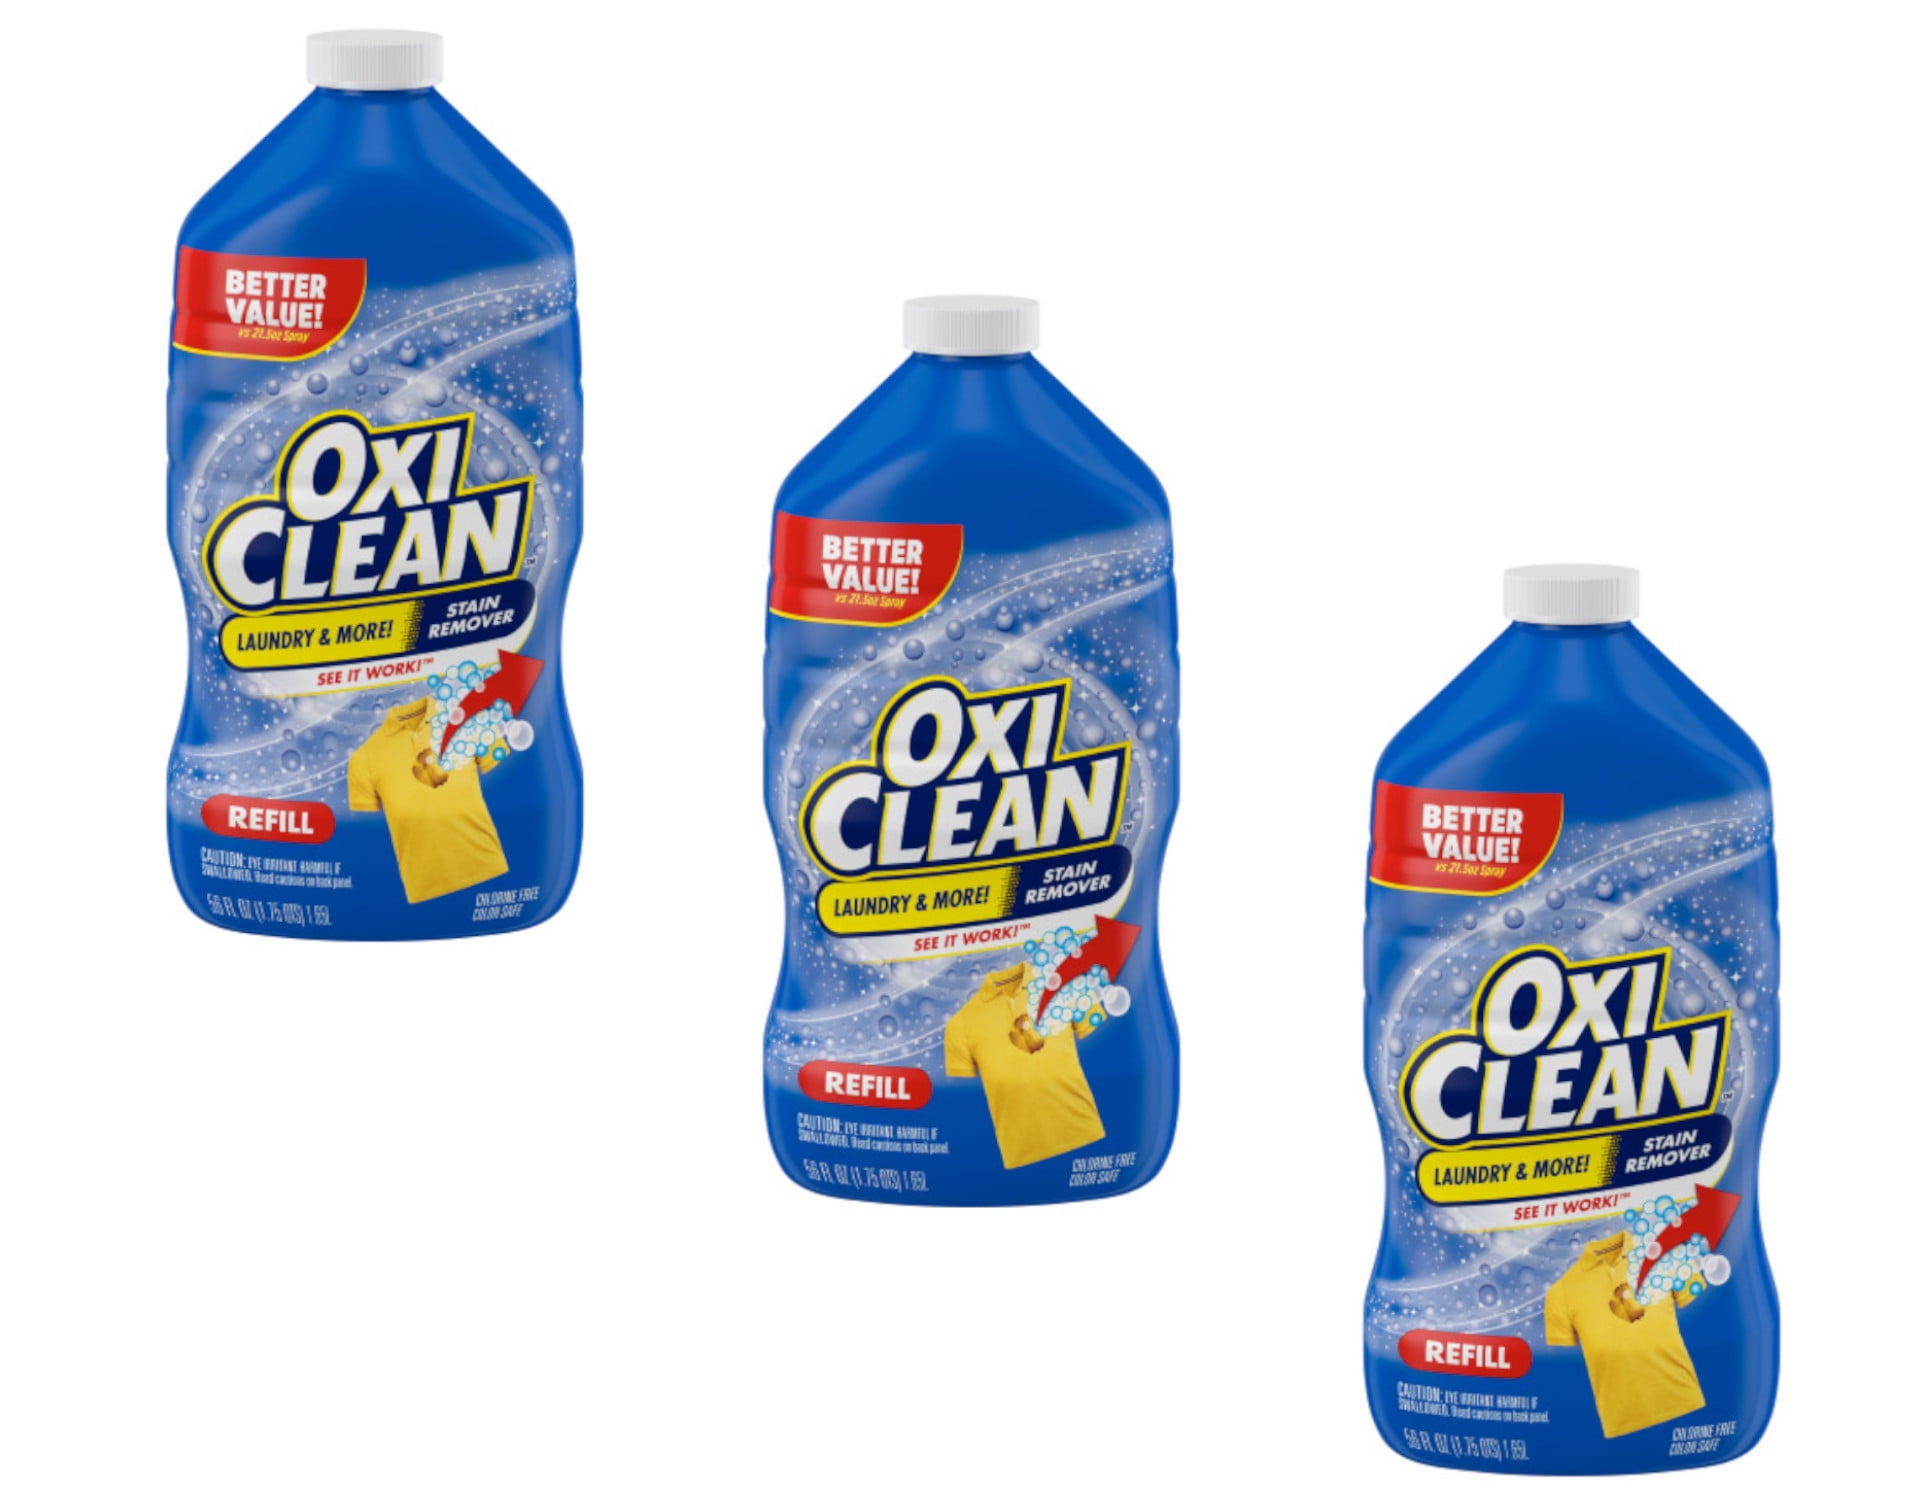 OxiClean White Revive Laundry Stain Remover, 40.5 fl oz